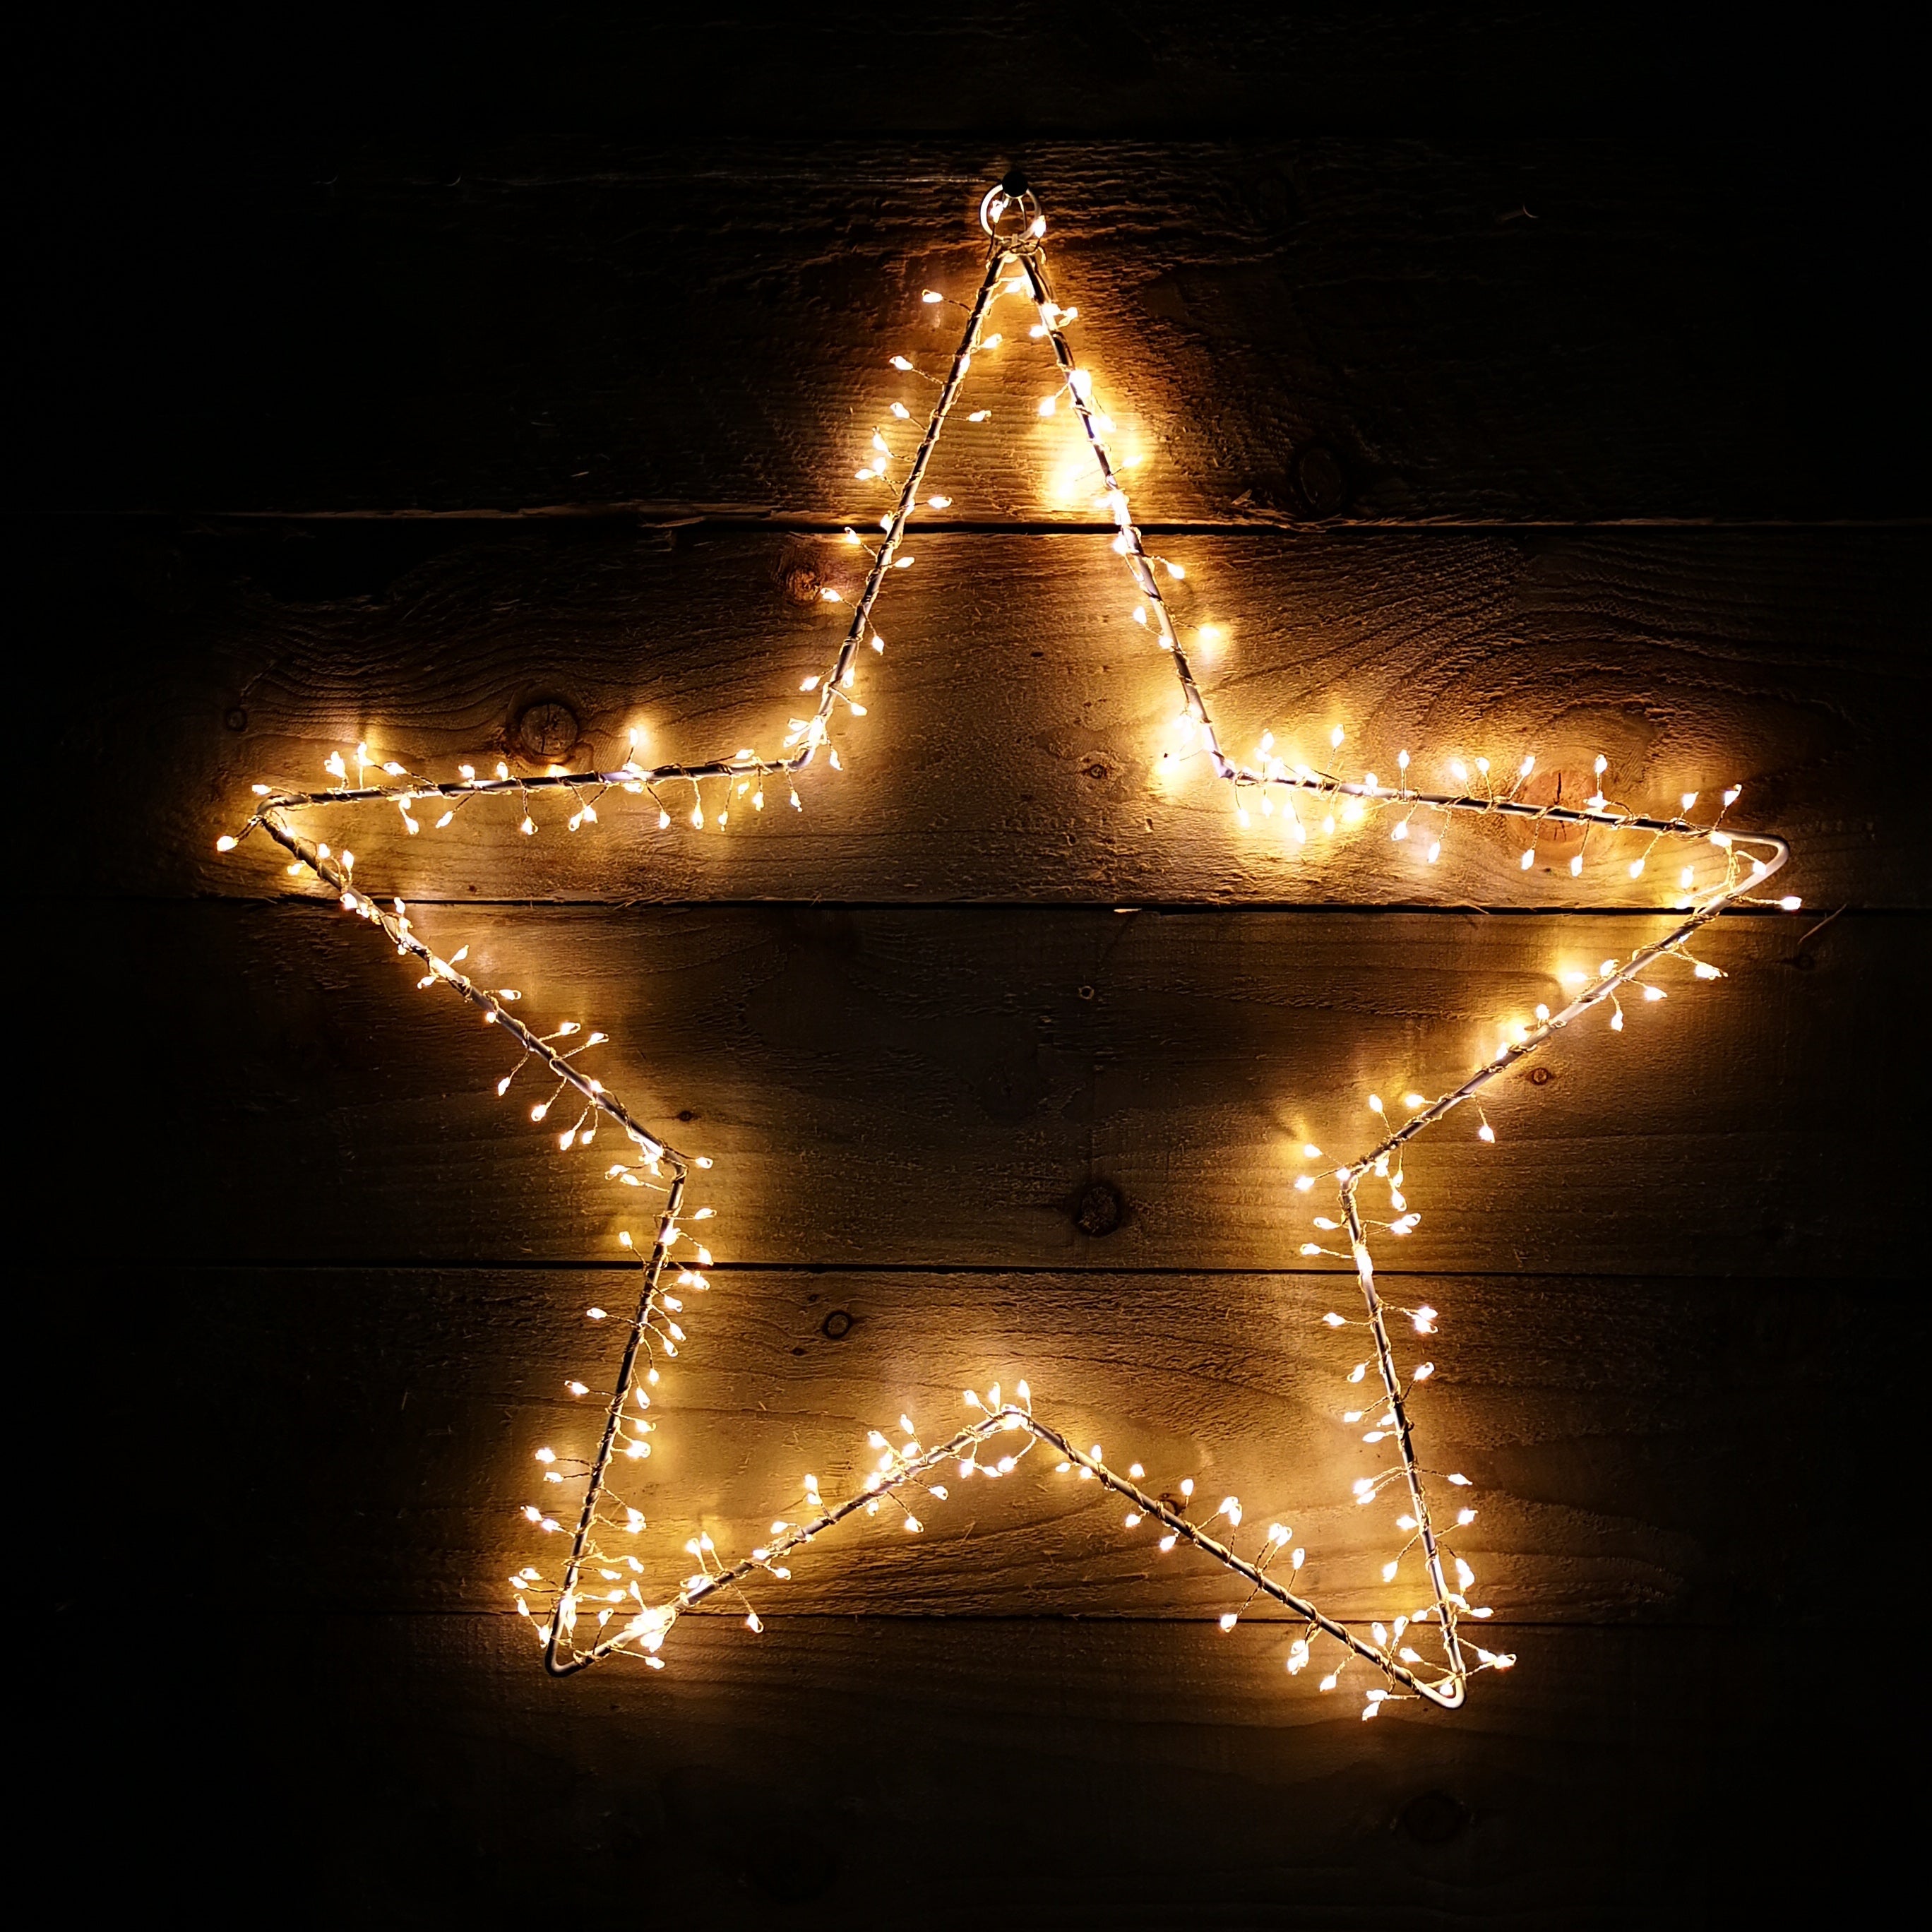 280 LED Festive 60cm Premier MicroBrights Outdoor Star Silhouette in Warm White